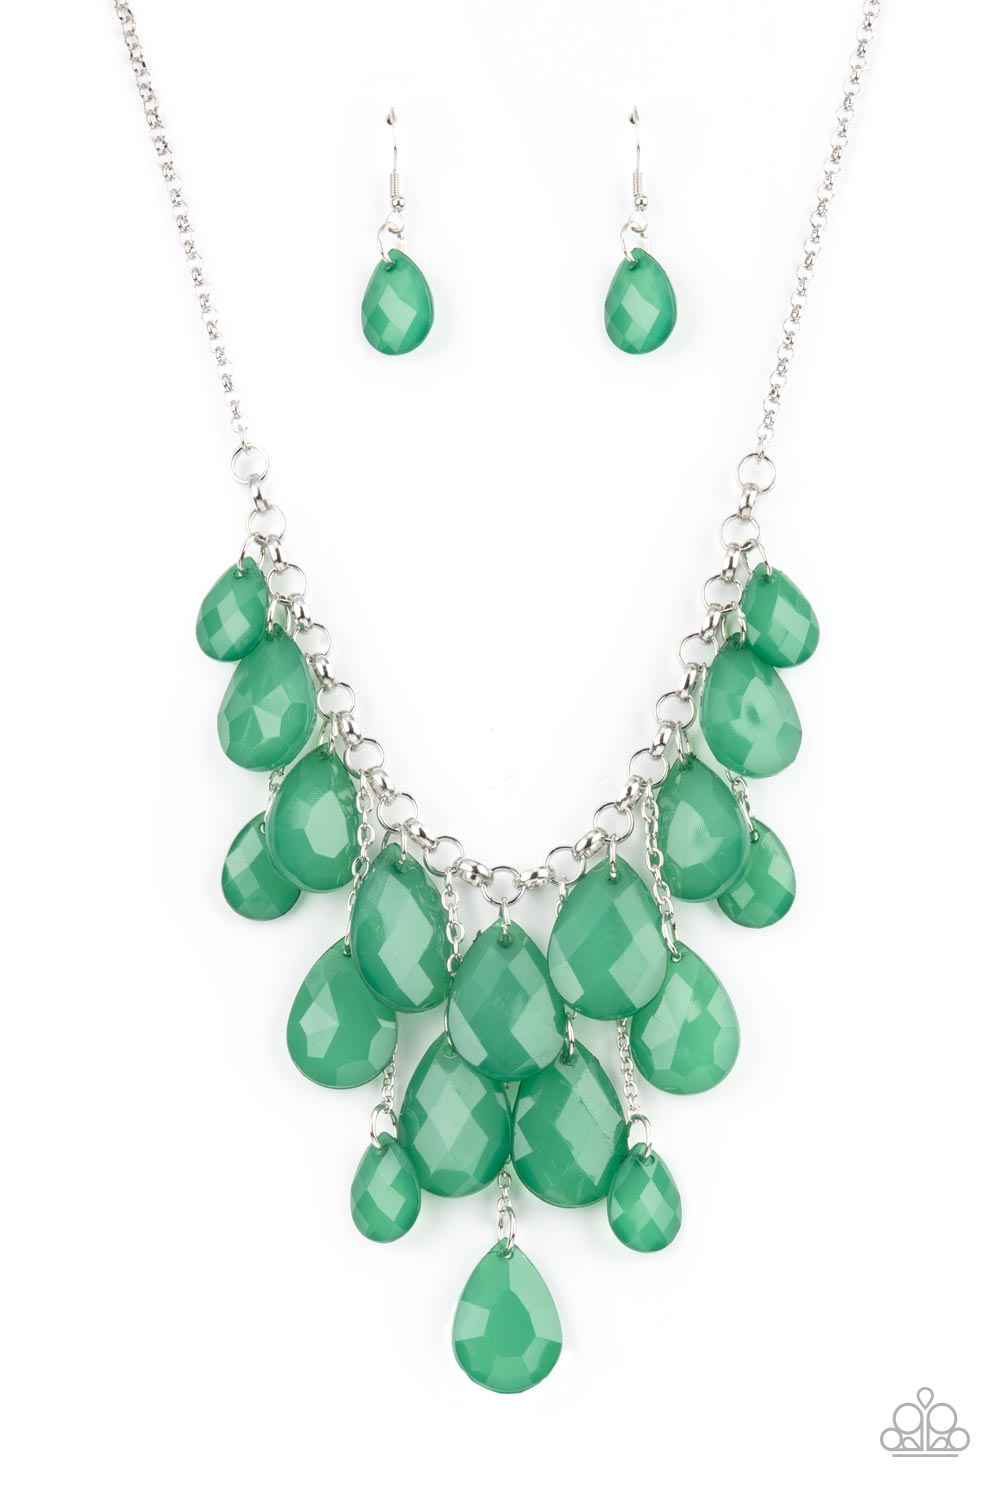 Paparazzi Necklace - Front Row Flamboyance - Green